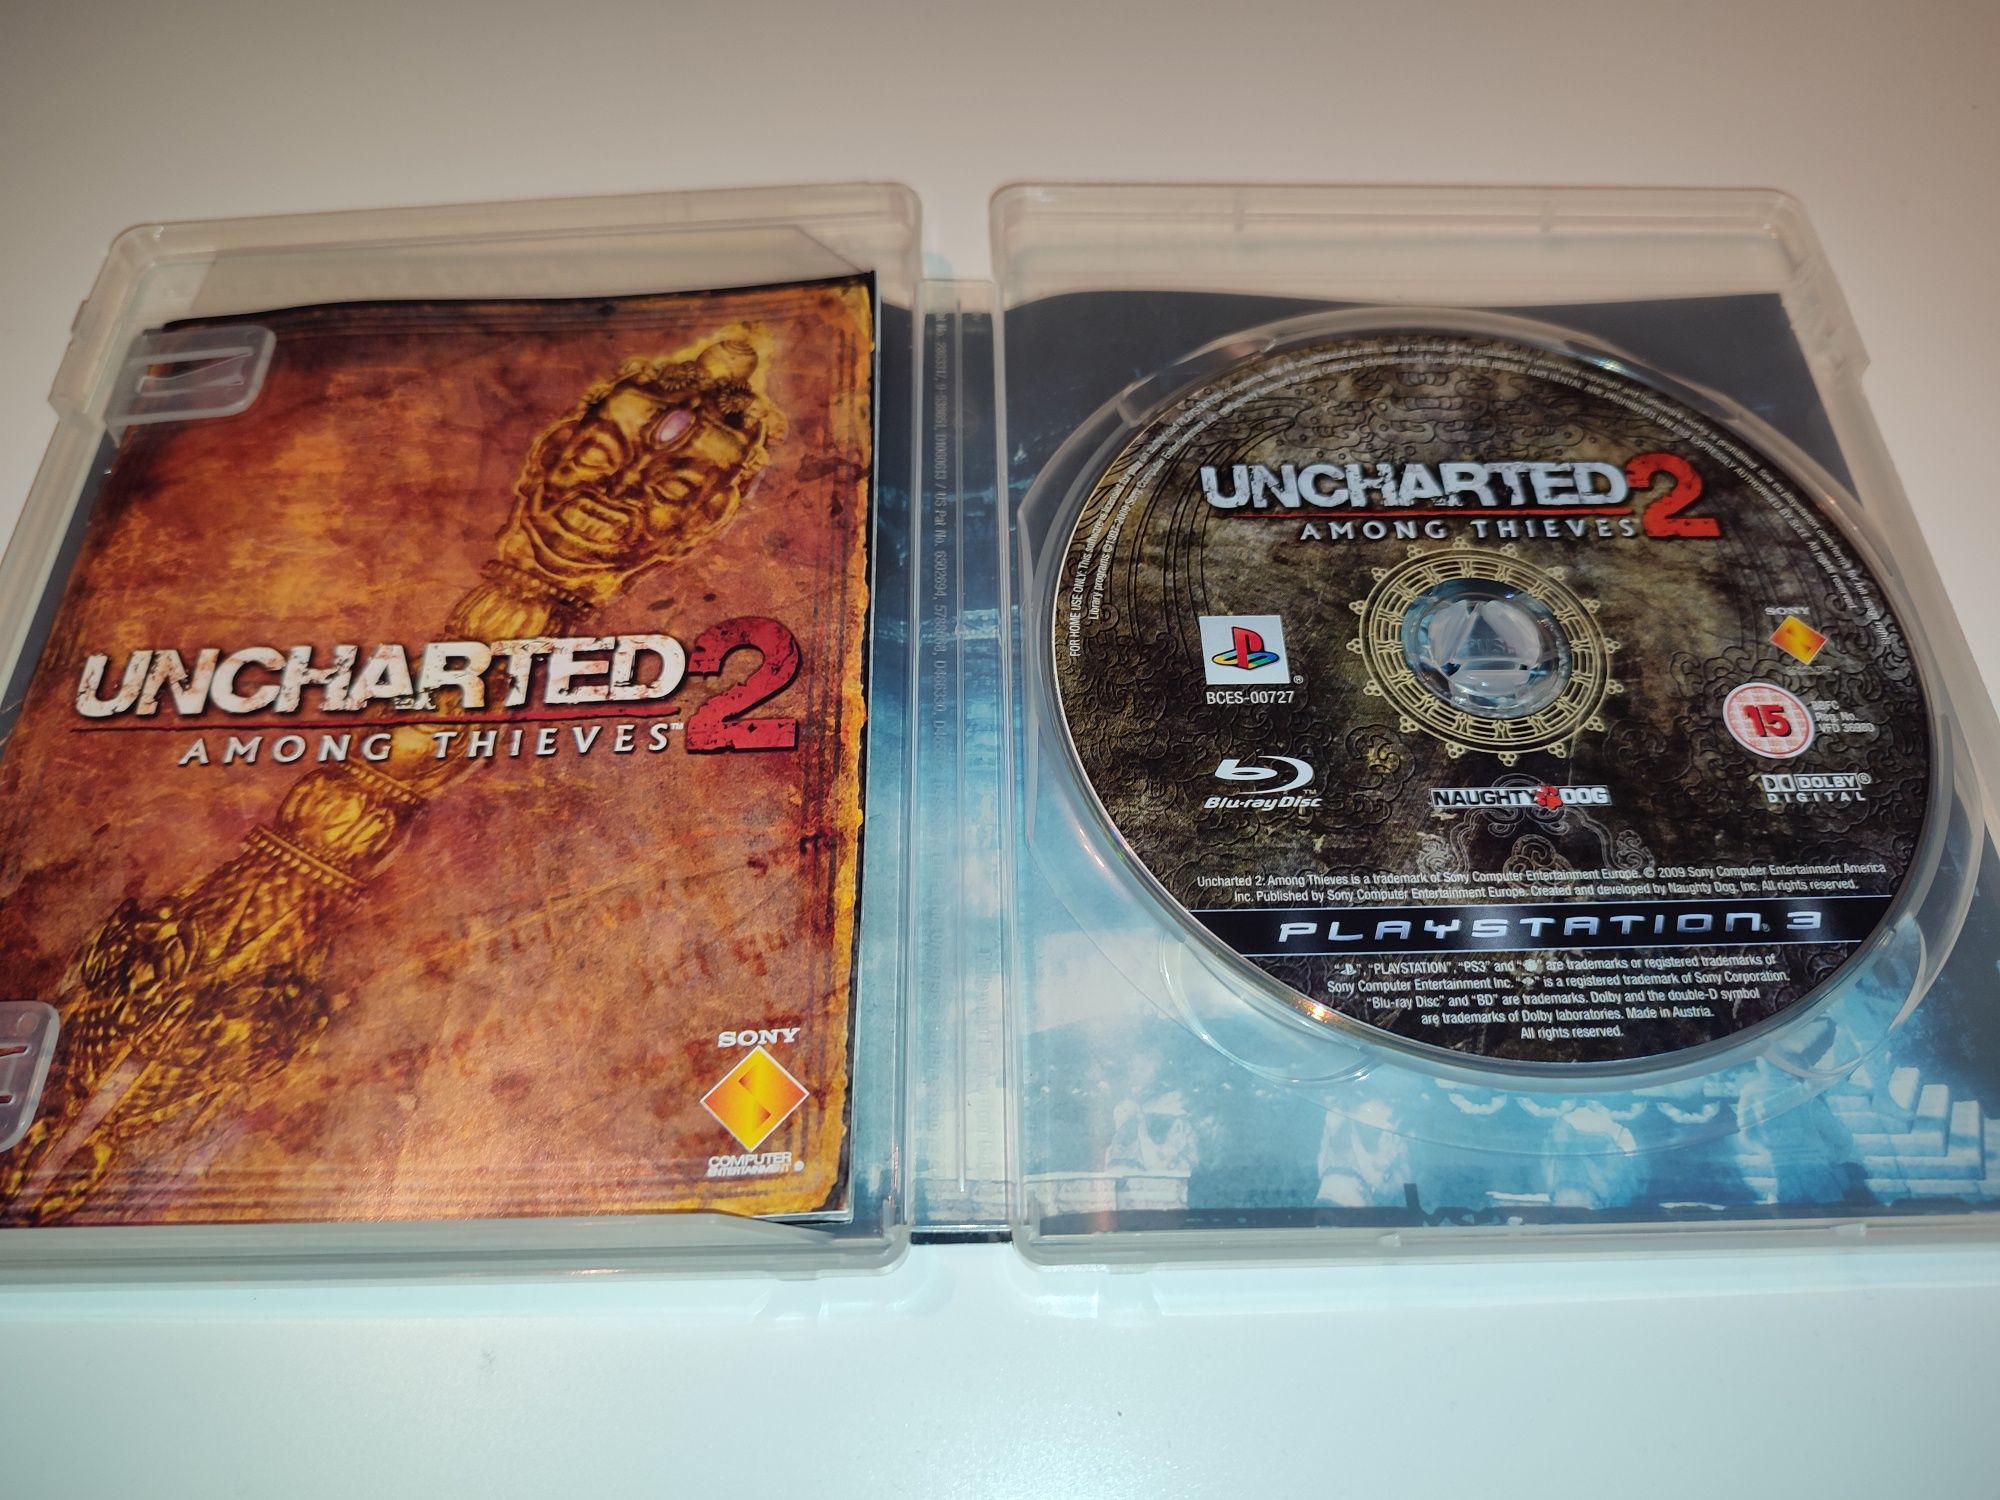 Gra Ps3 Uncharted 2 II gry PlayStation 3 Hit Sniper Diablo GOW